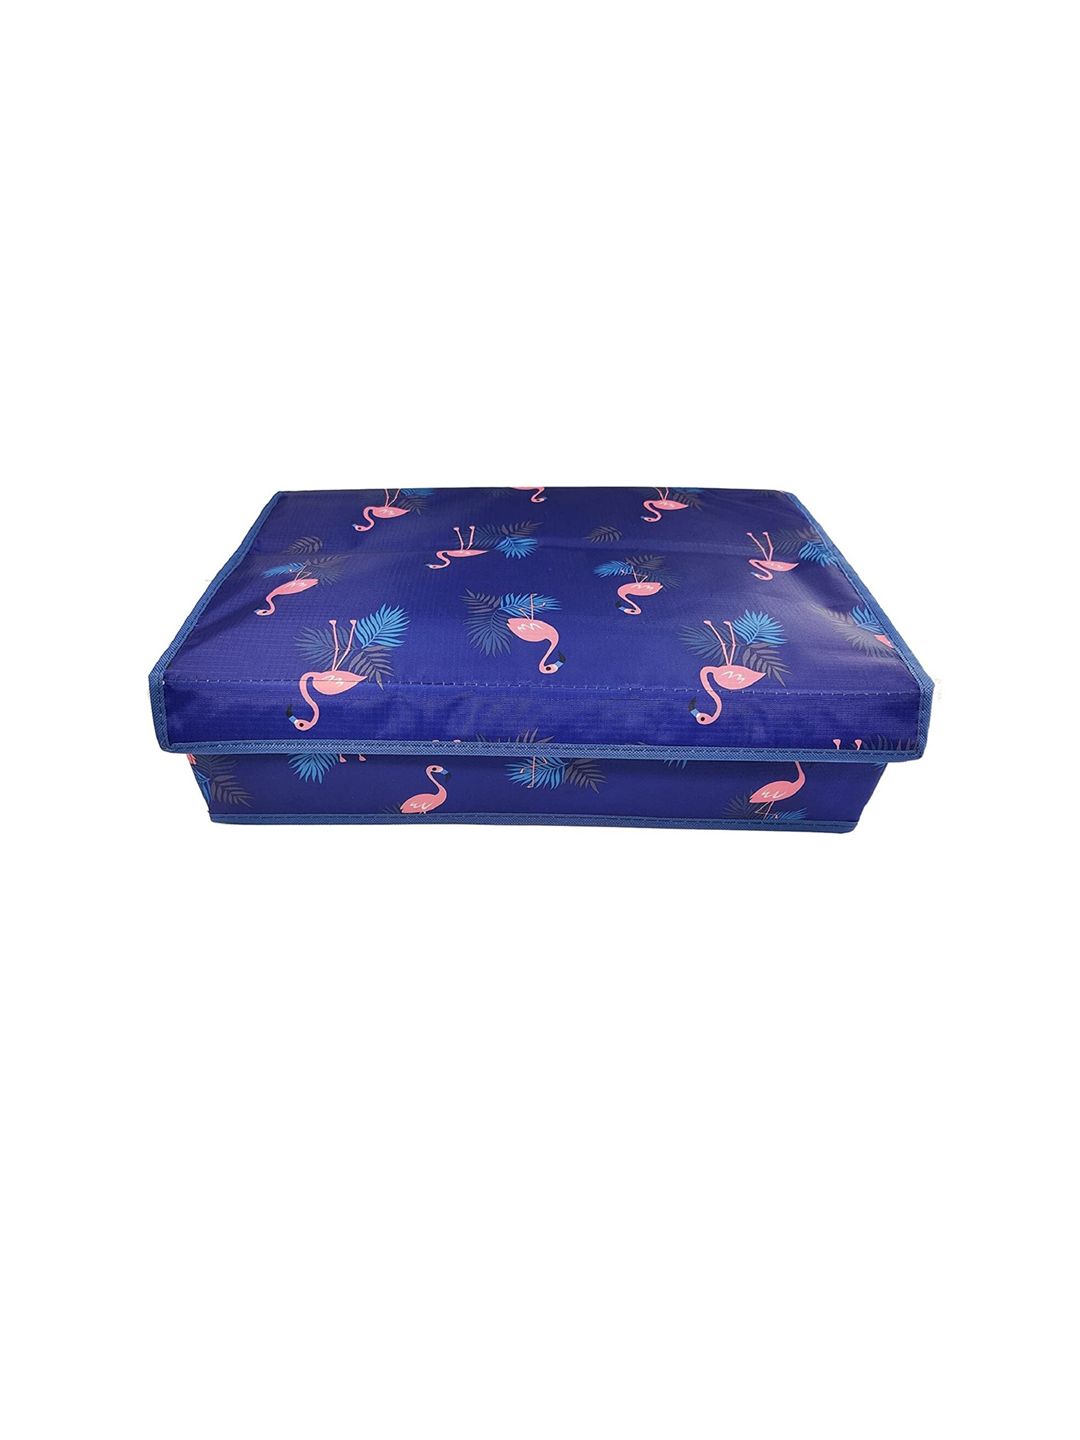 HOUSE OF QUIRK Printed Compartment Organizer Price in India